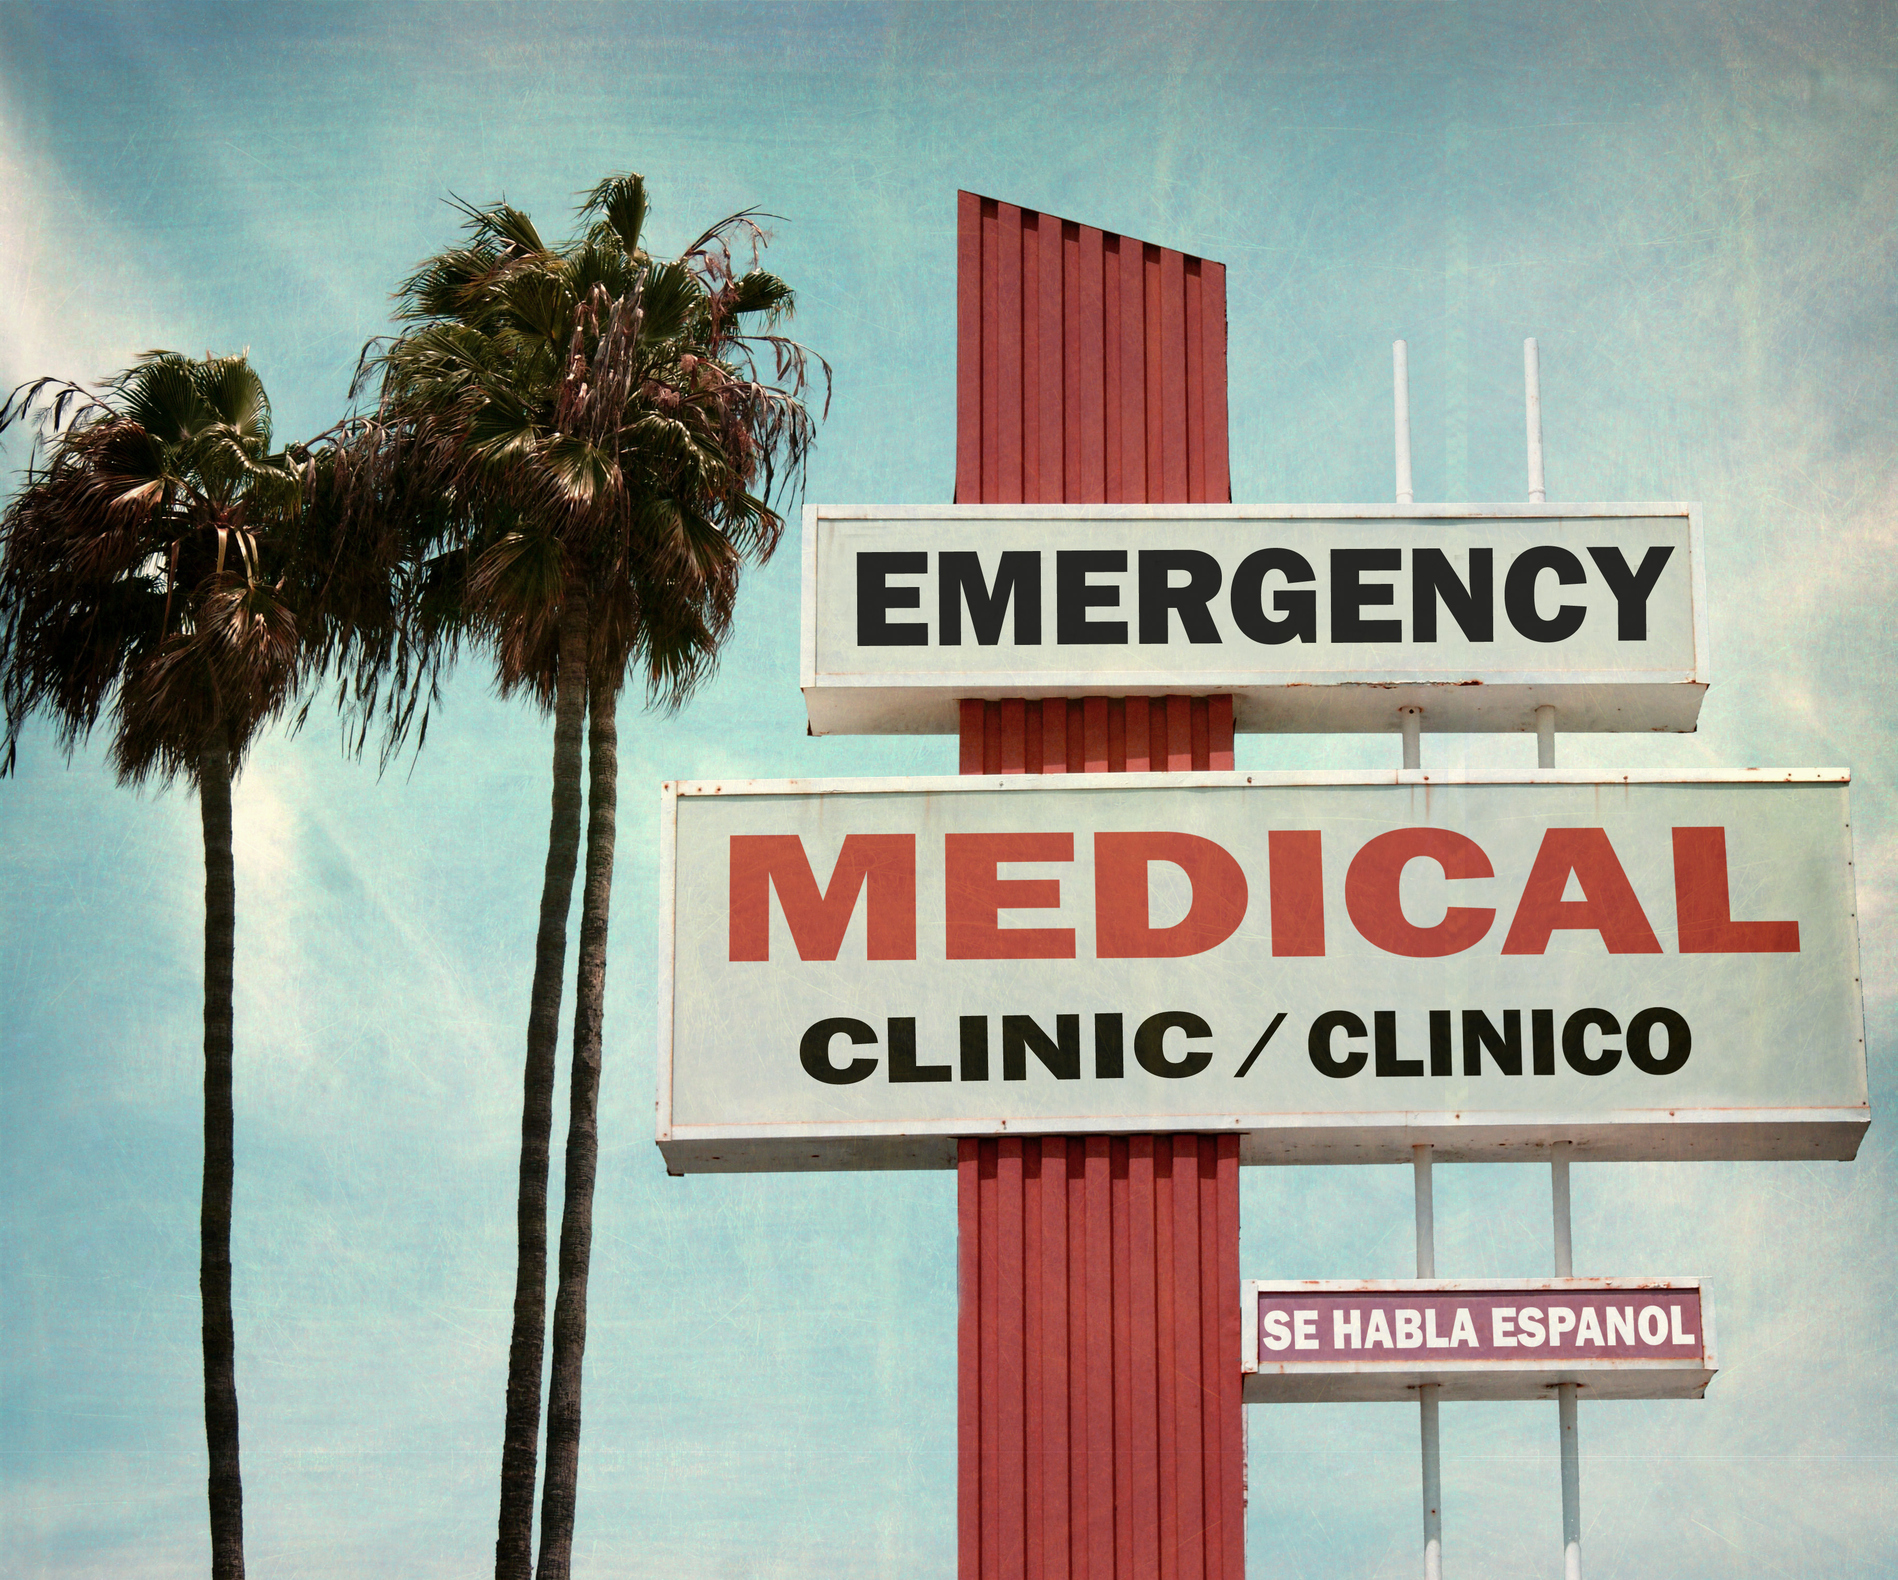 Medical clinic sign in Spanish